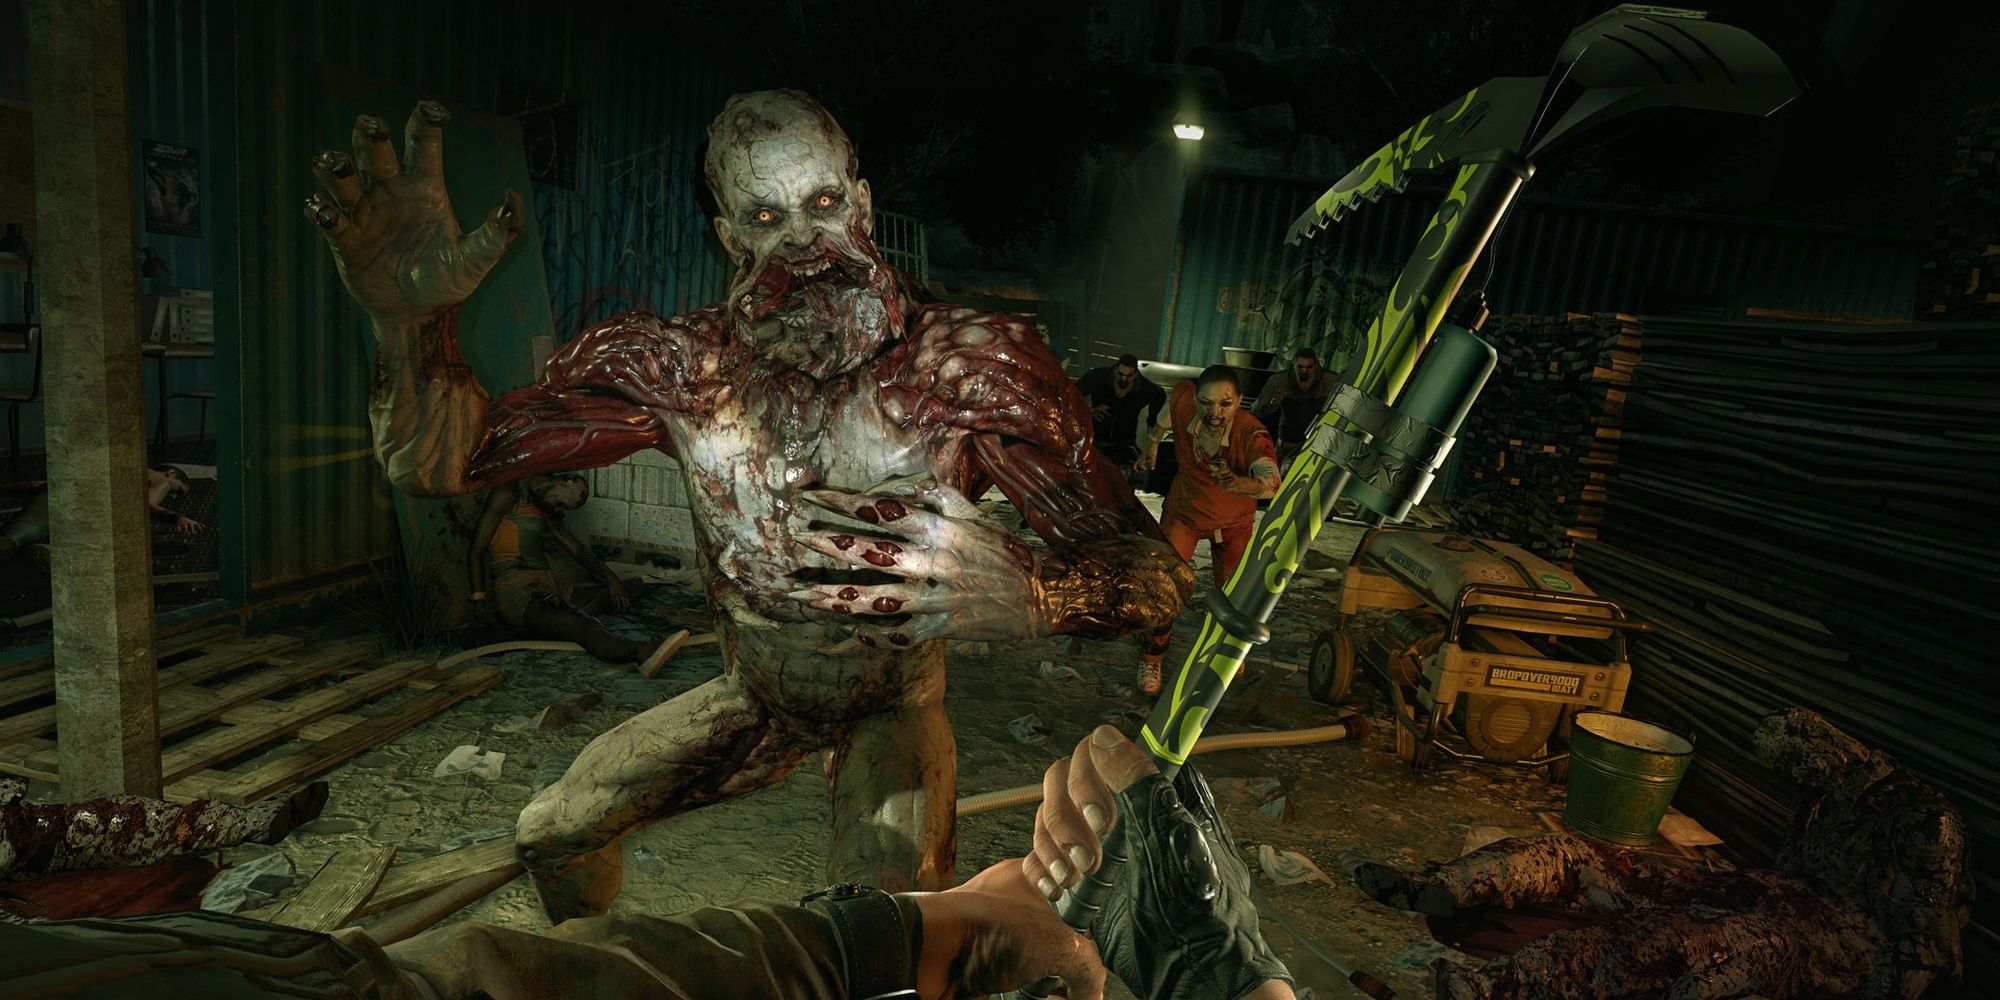 Dying Light: Crane Fighting A Volatile With A Melee Weapon